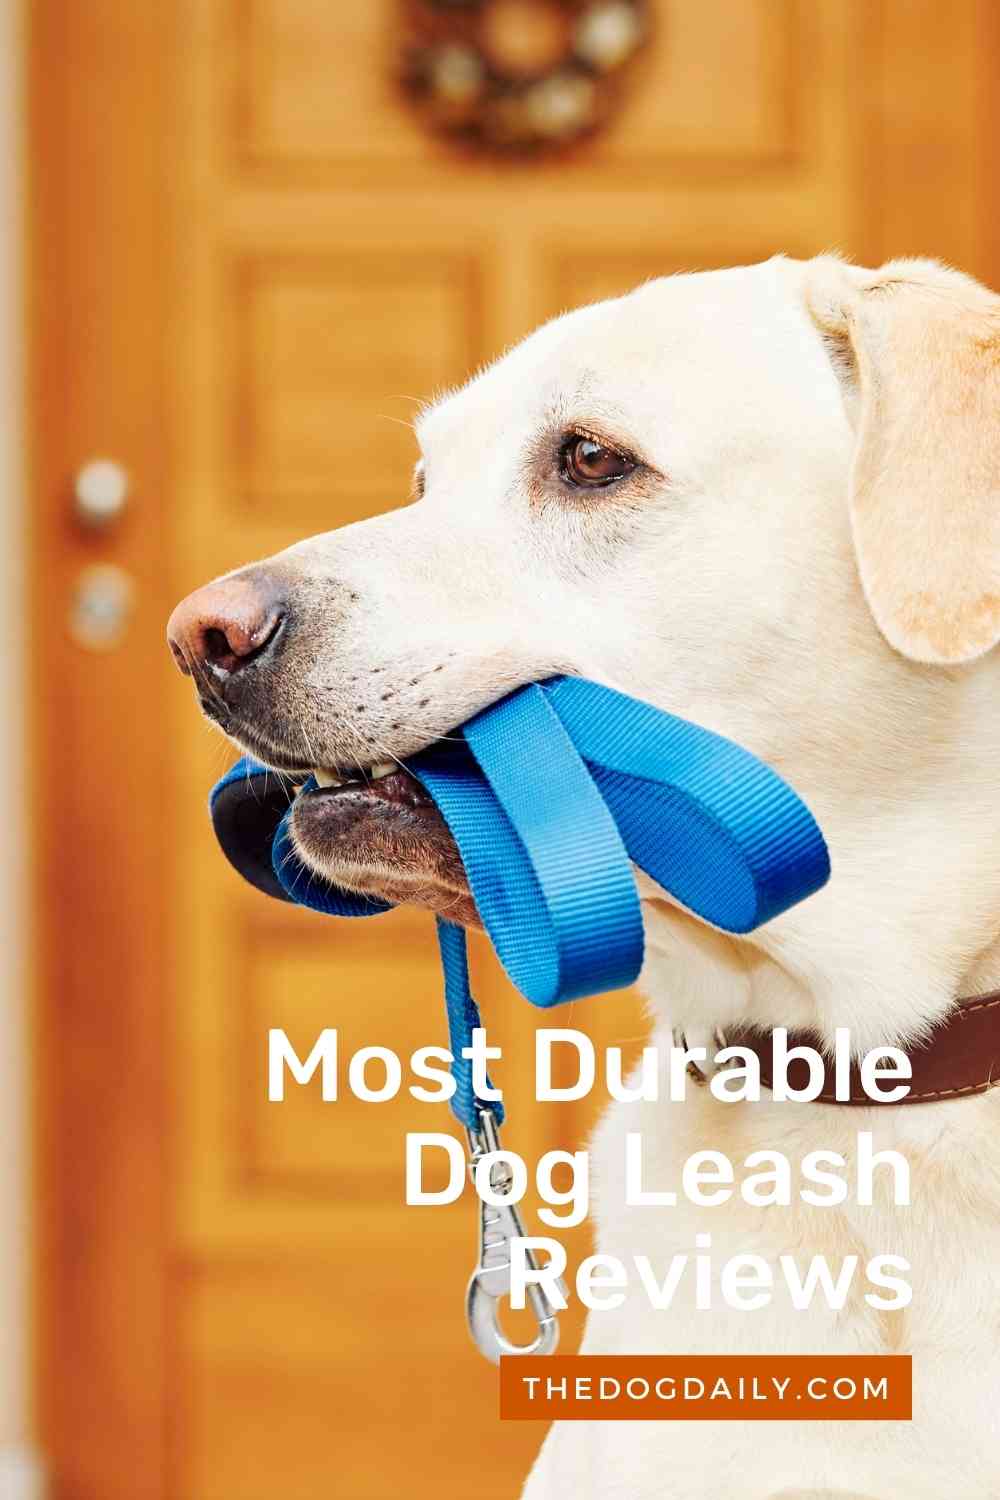 Our Durable Dog Leash Reviews - The Dog Daily